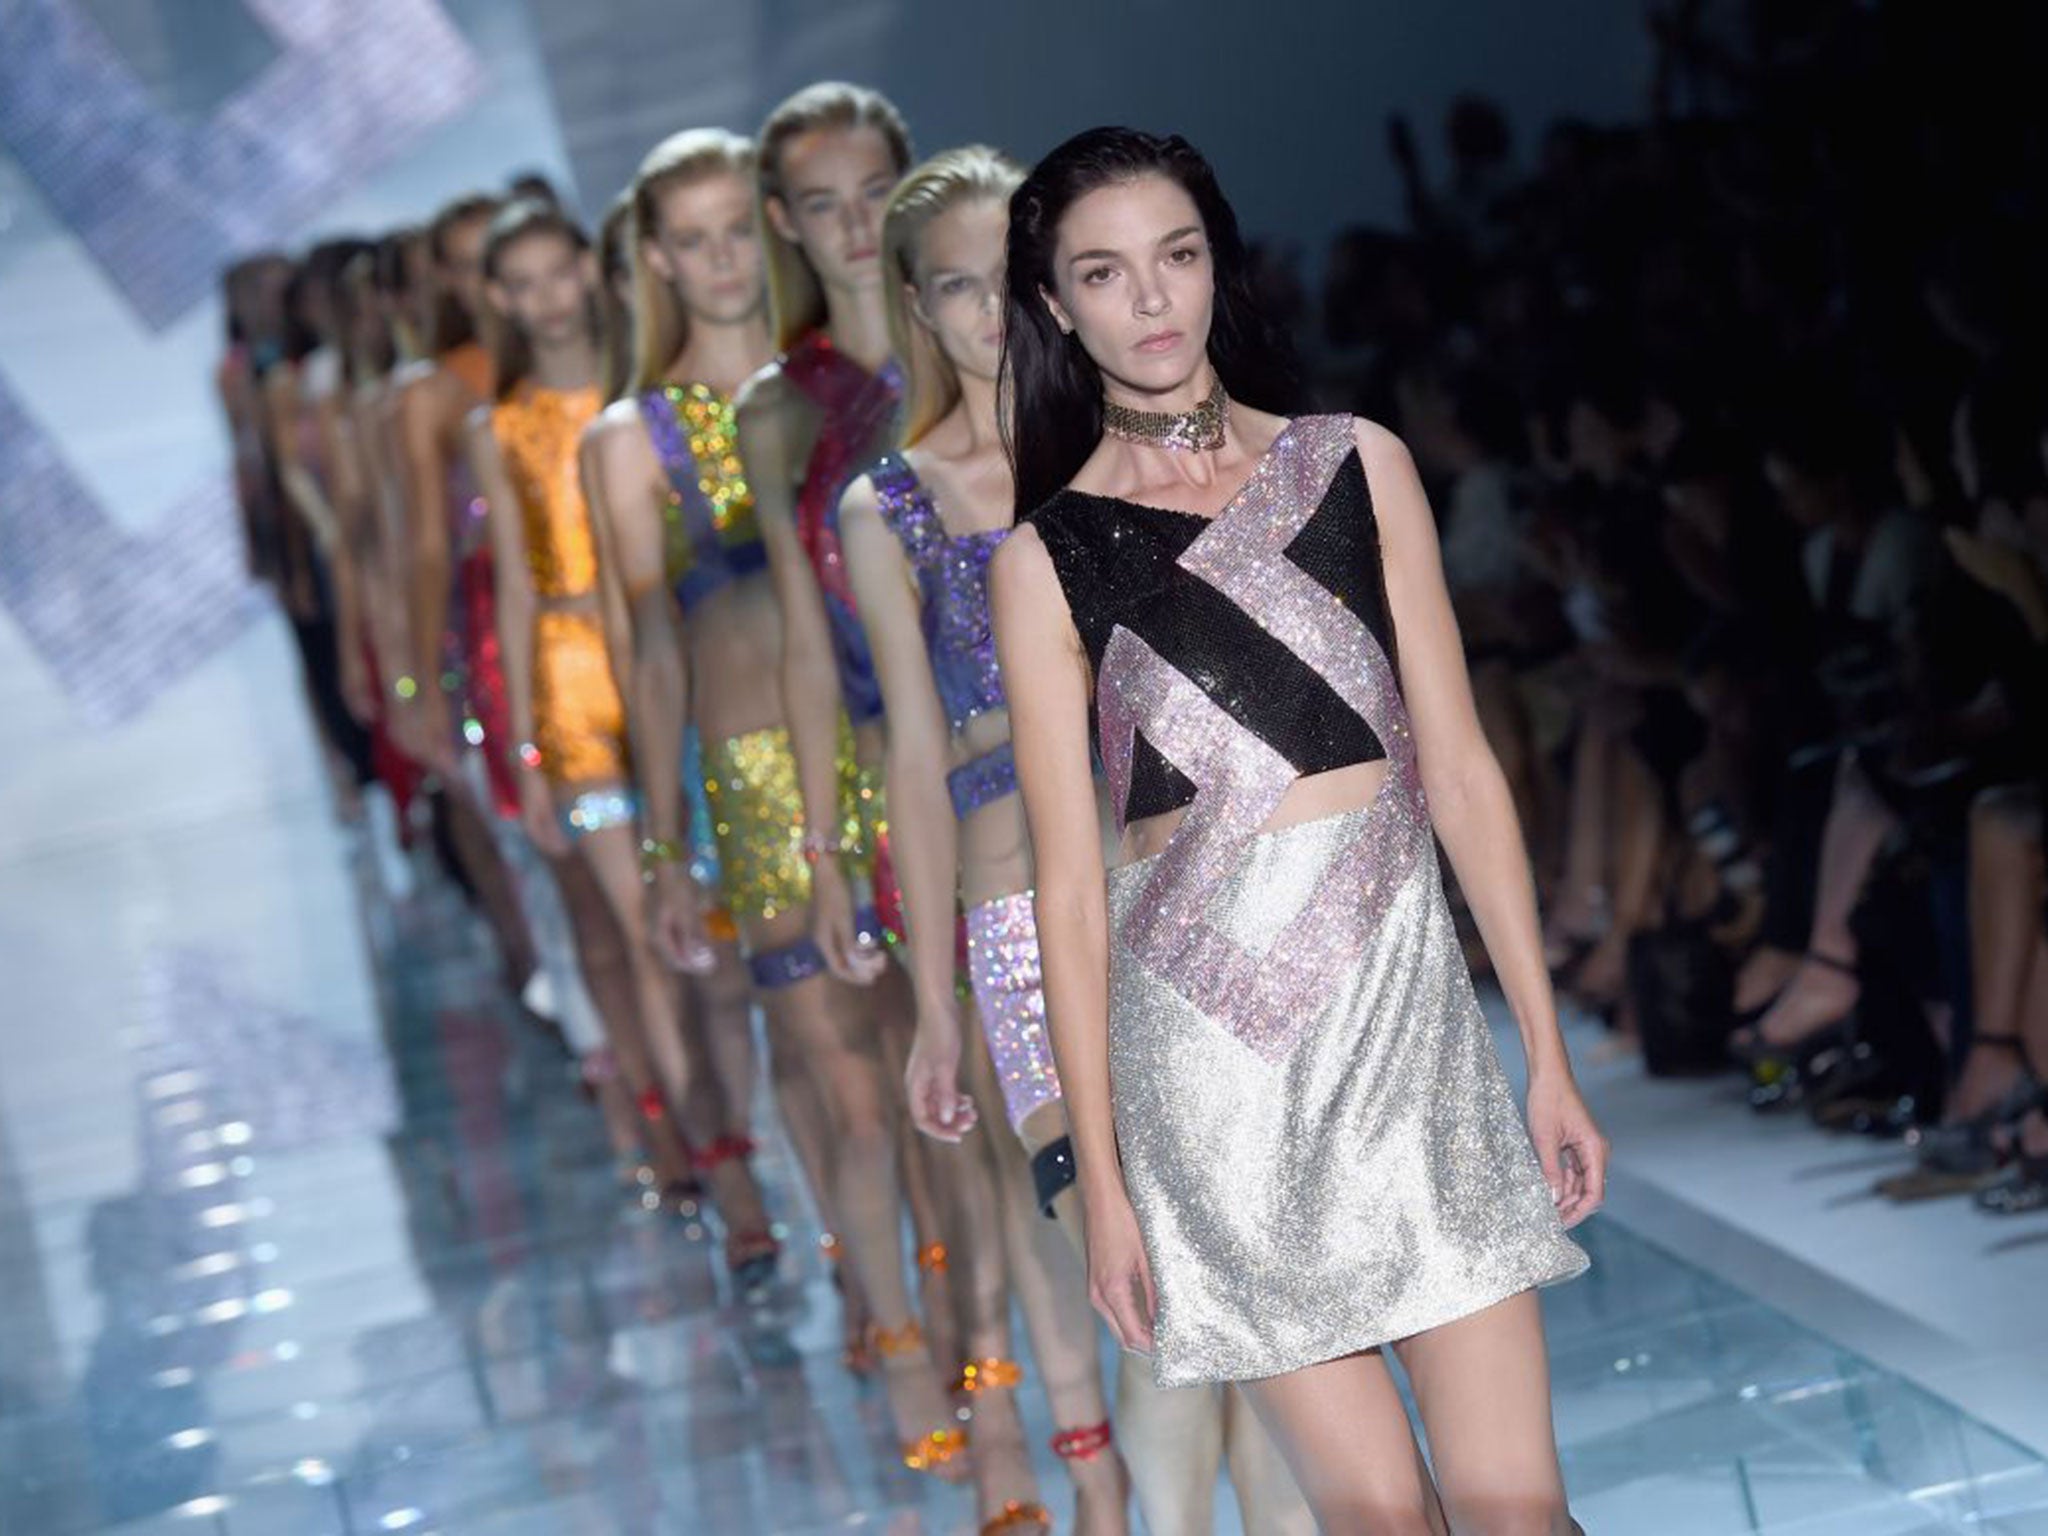 Walking tall: unlike some, Donatella Versace showed a strong and vibrant collection